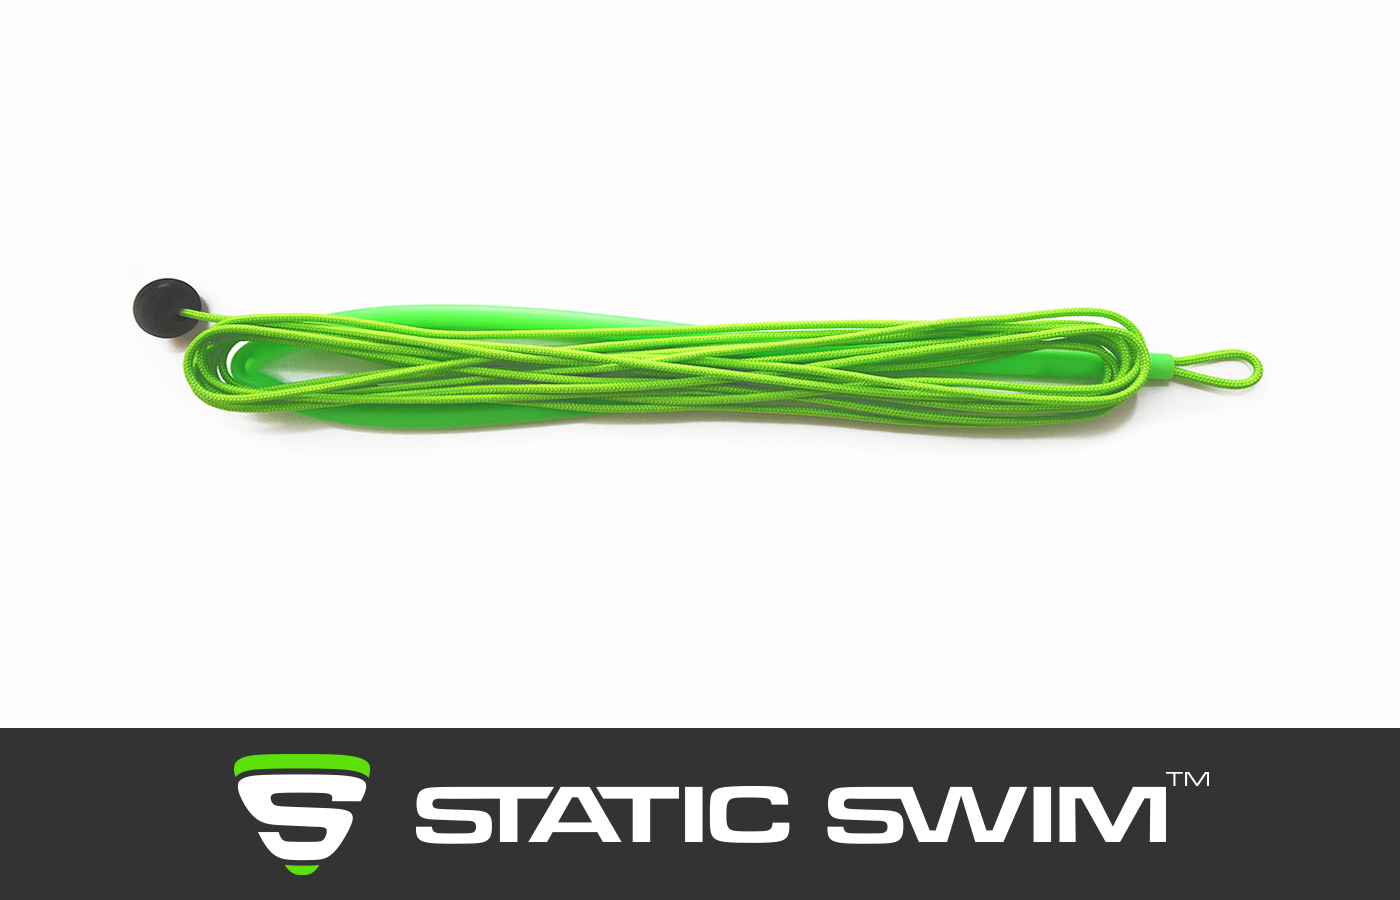 Stationary swimming Lasso/Extension attachment for pool